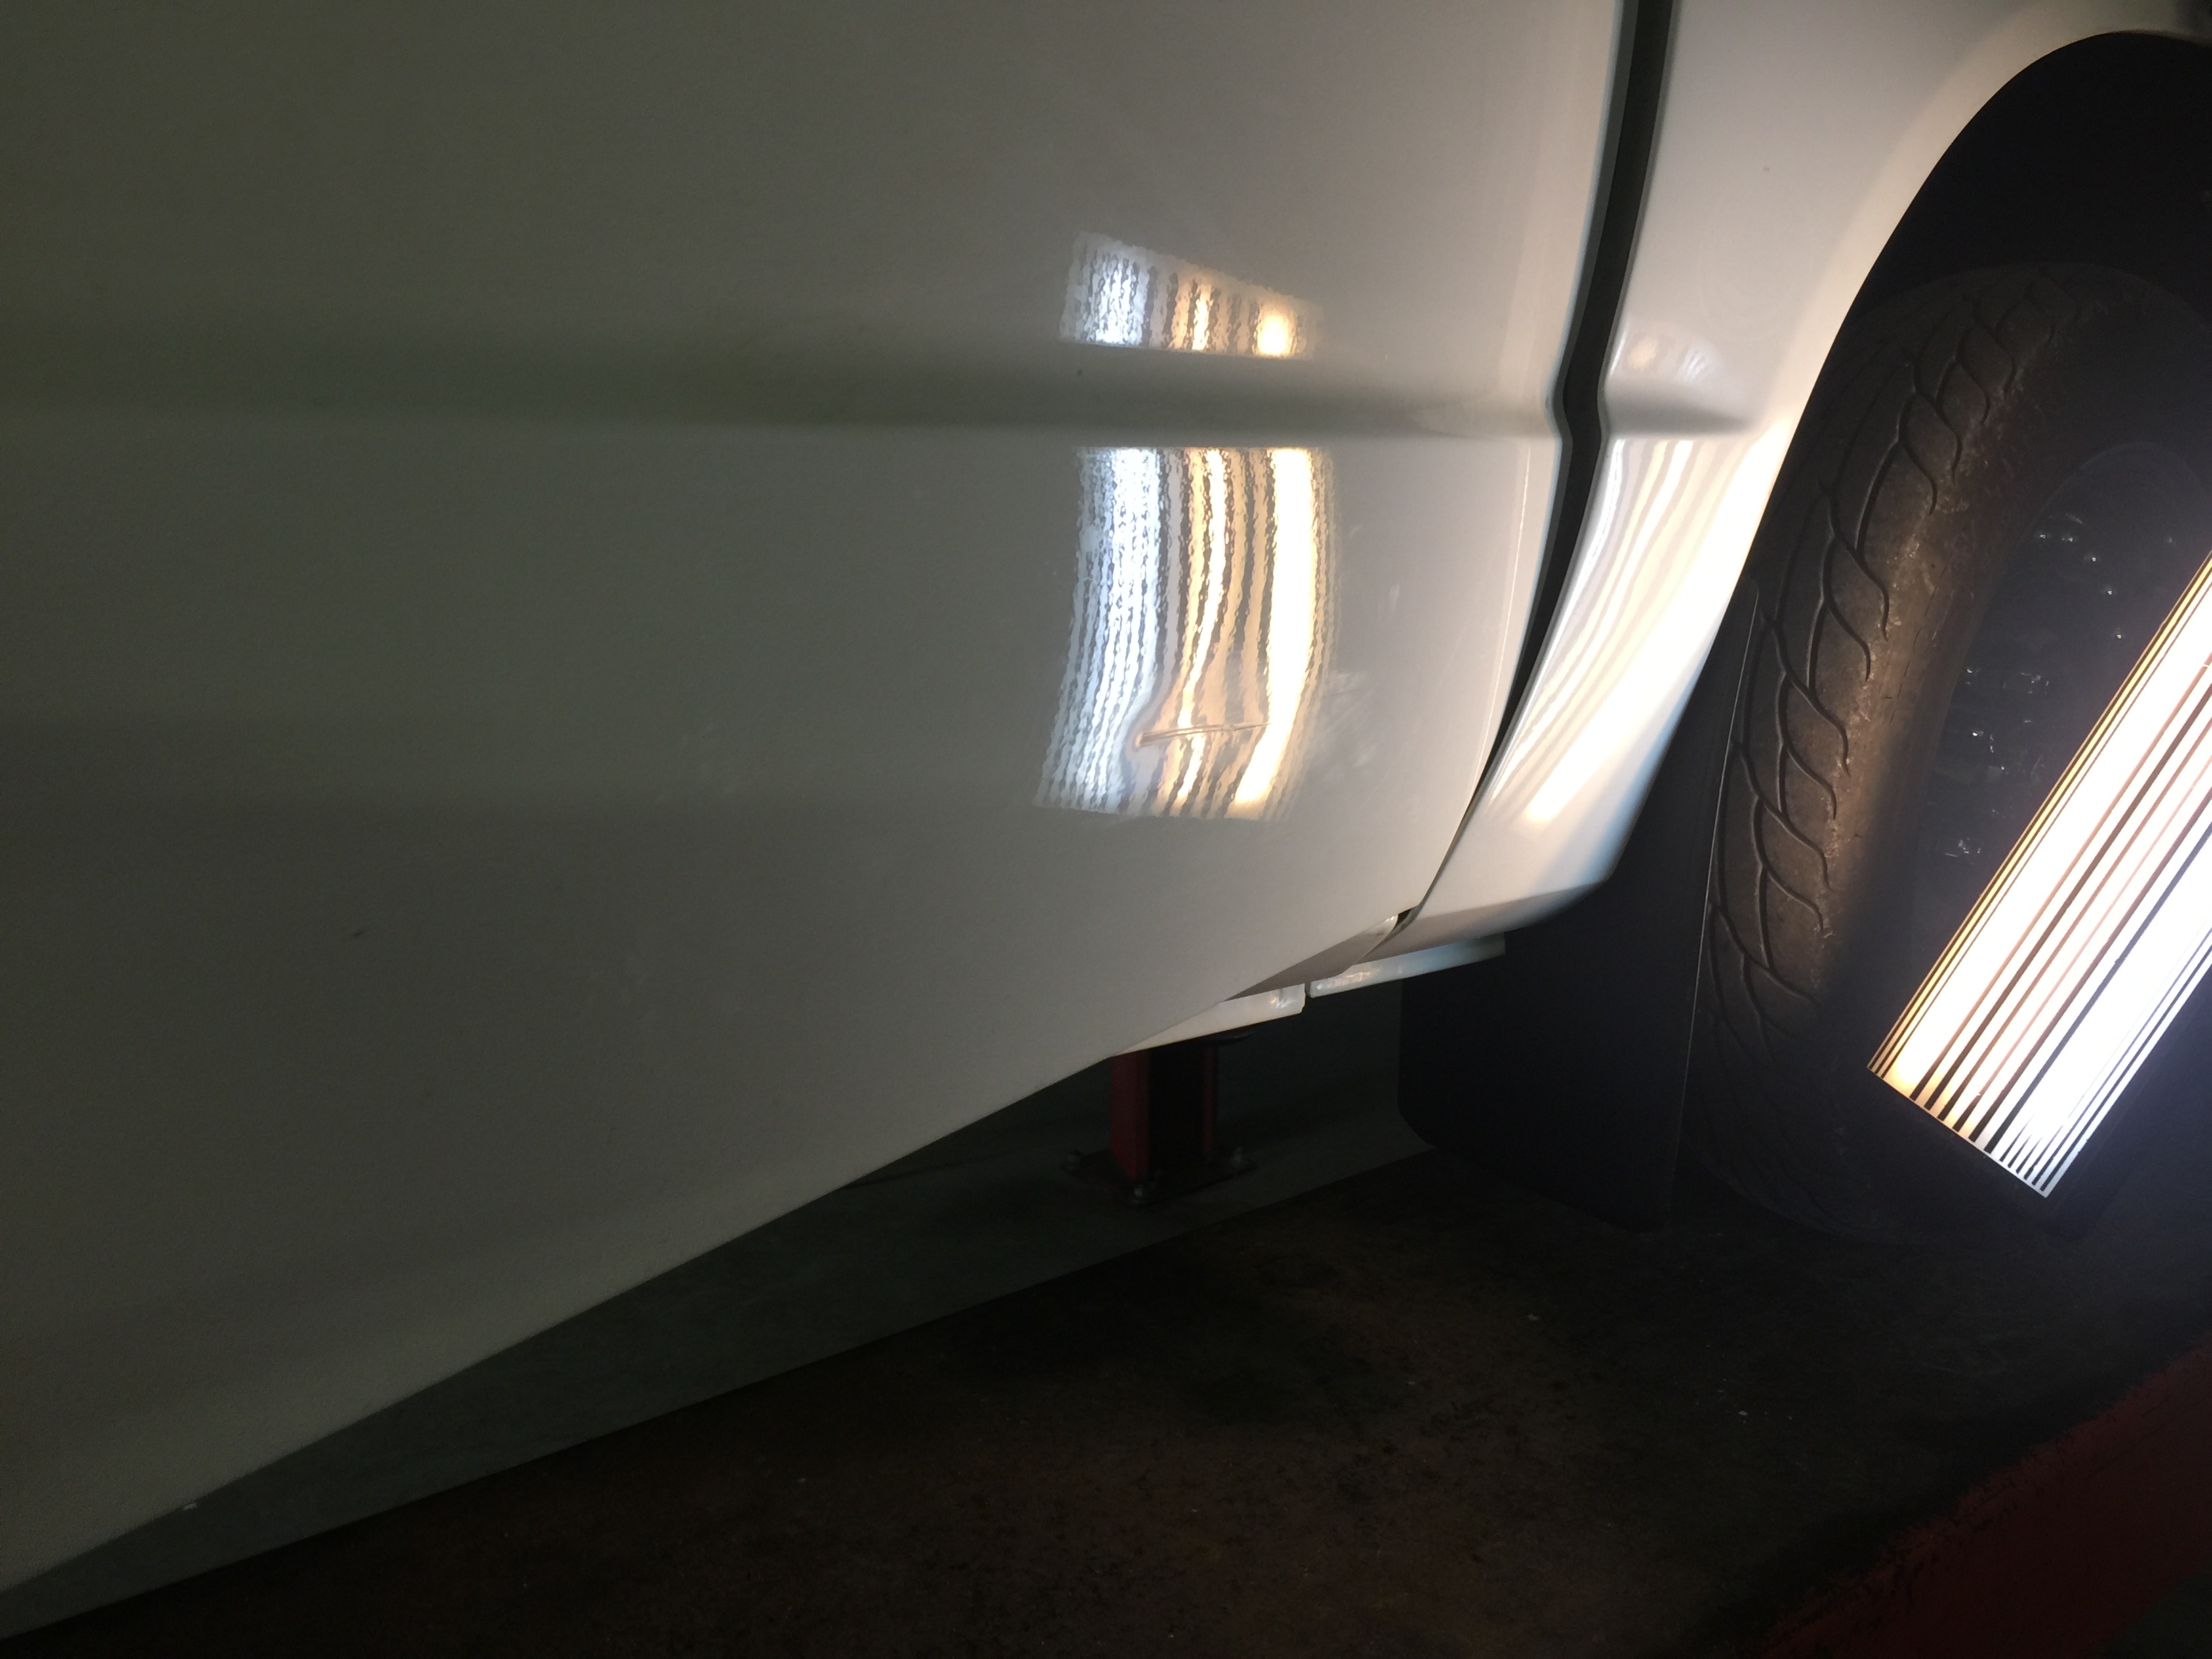 1998 Chevy S-10 Dent Repair, Springfield, IL. http://217dent.com